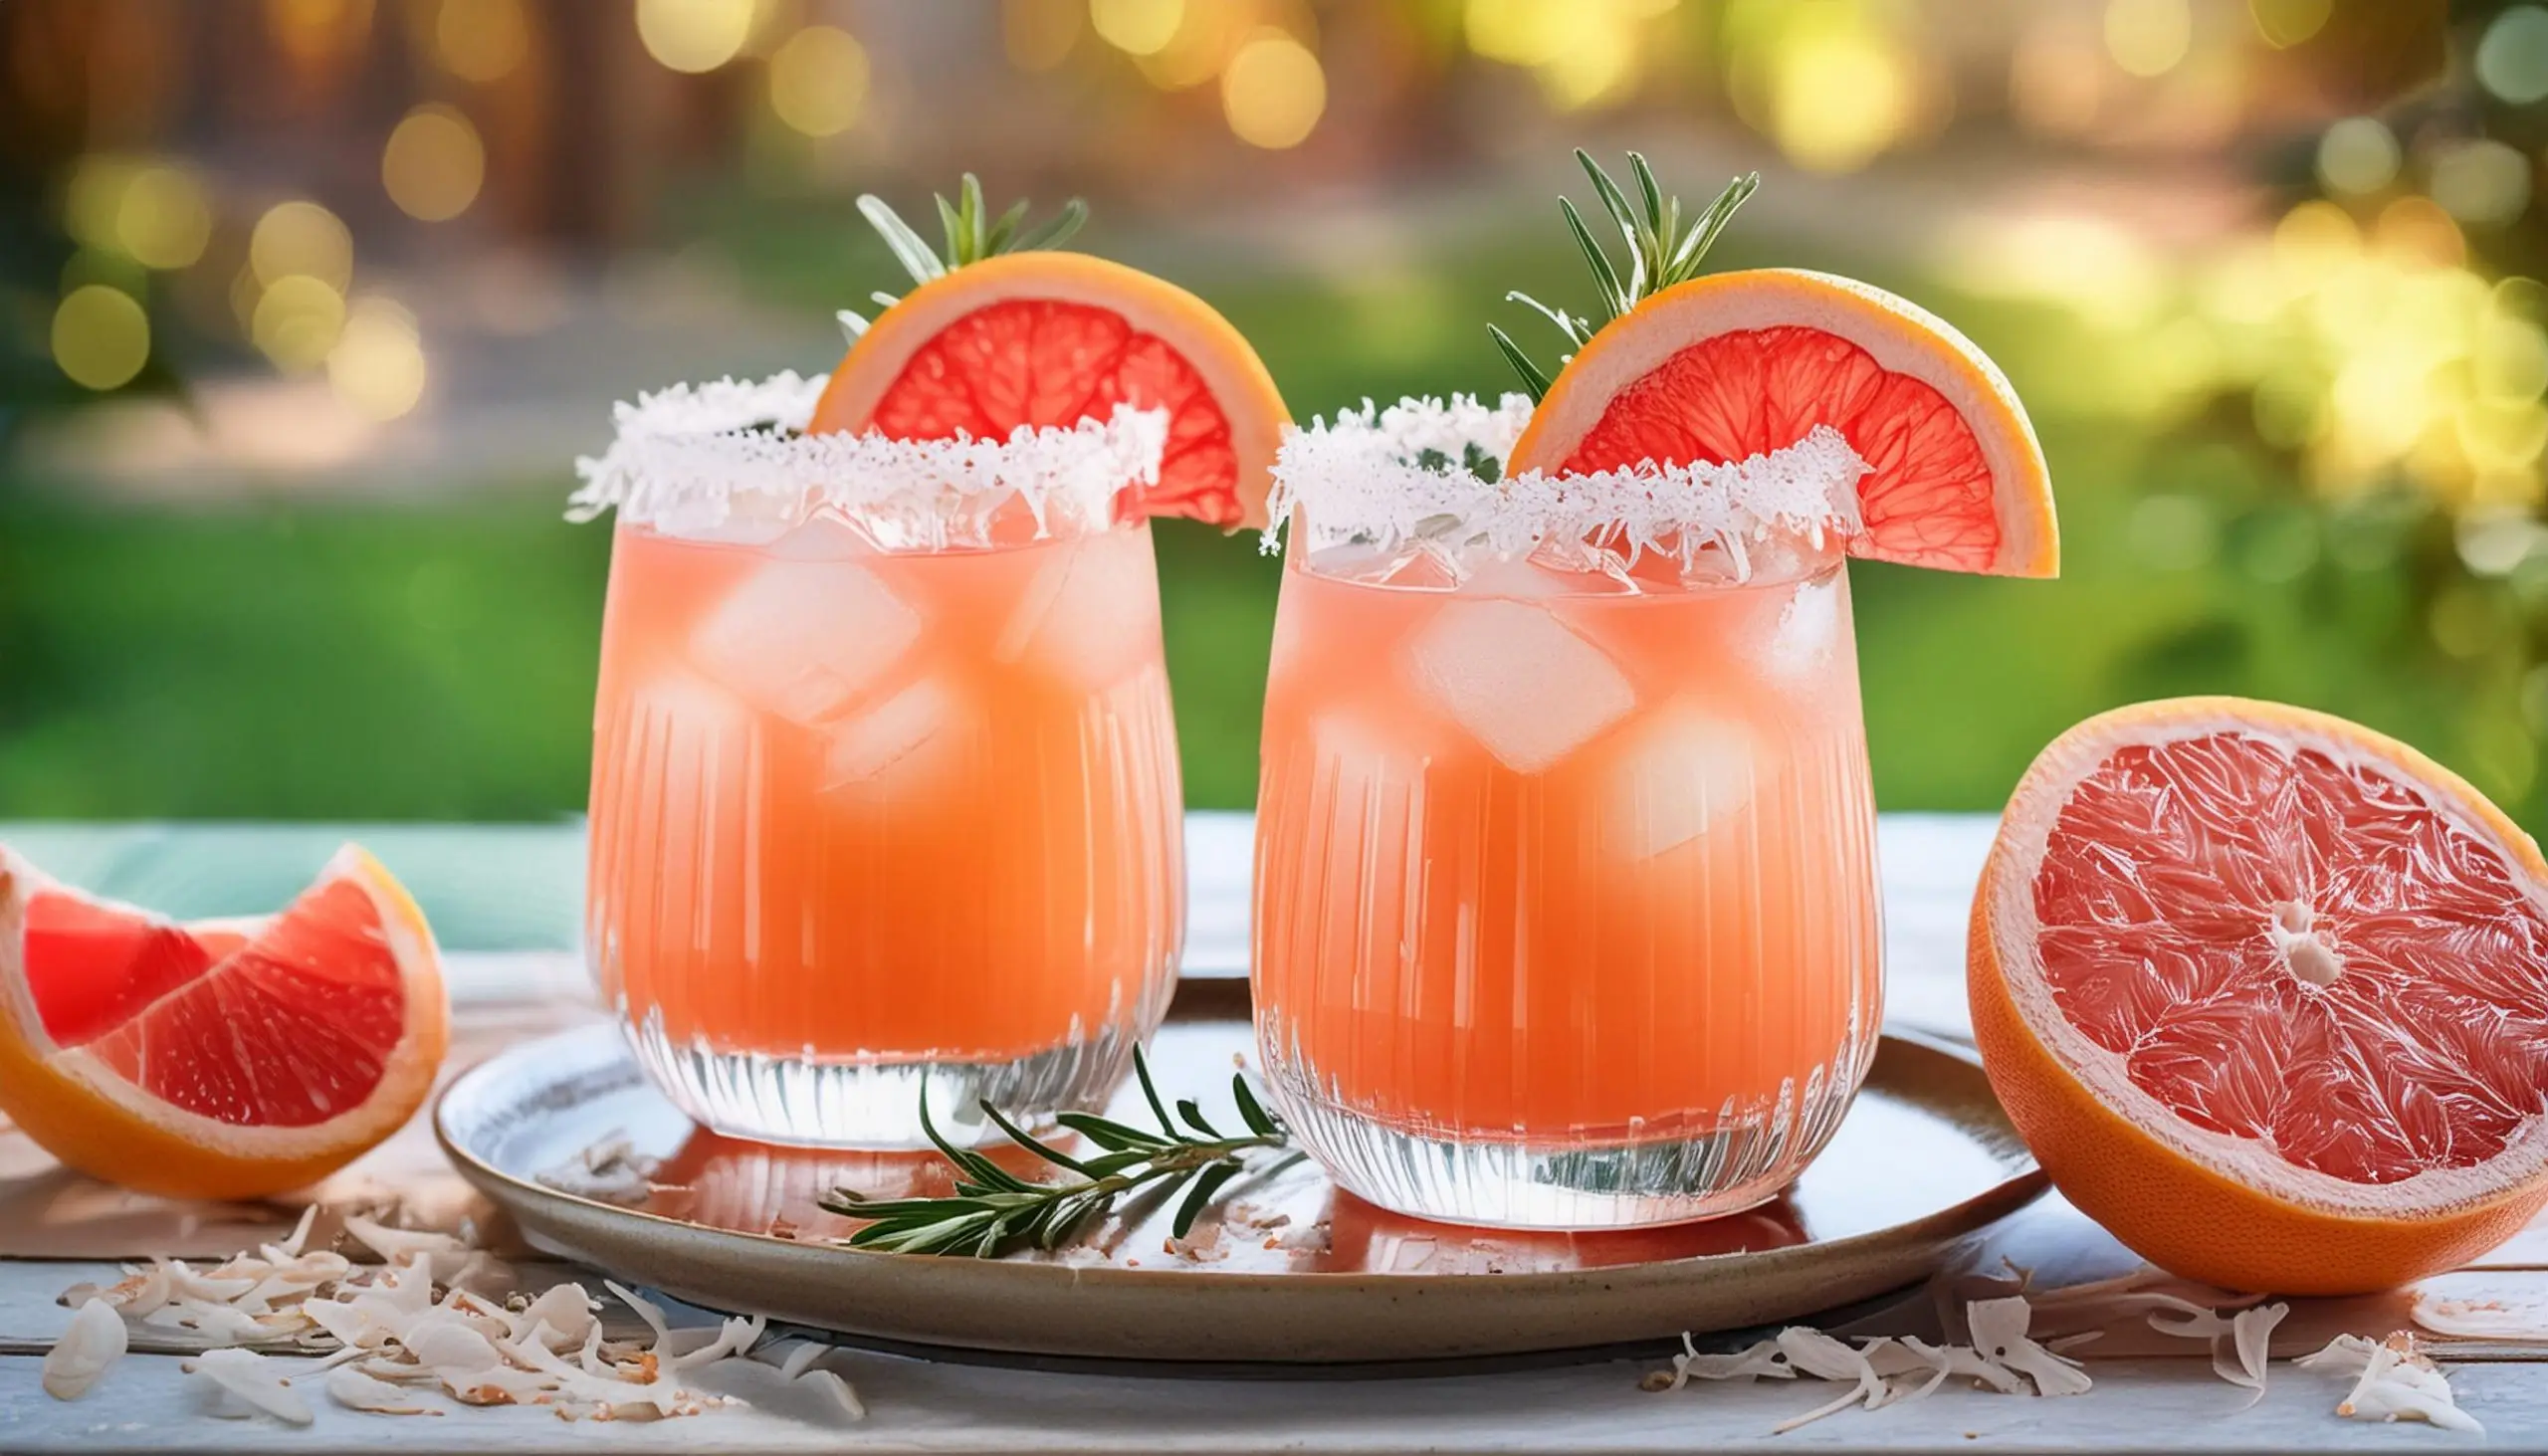 Two Coconut Paloma cocktails with shredded coconut rims and rosemary garnish in a garden setting